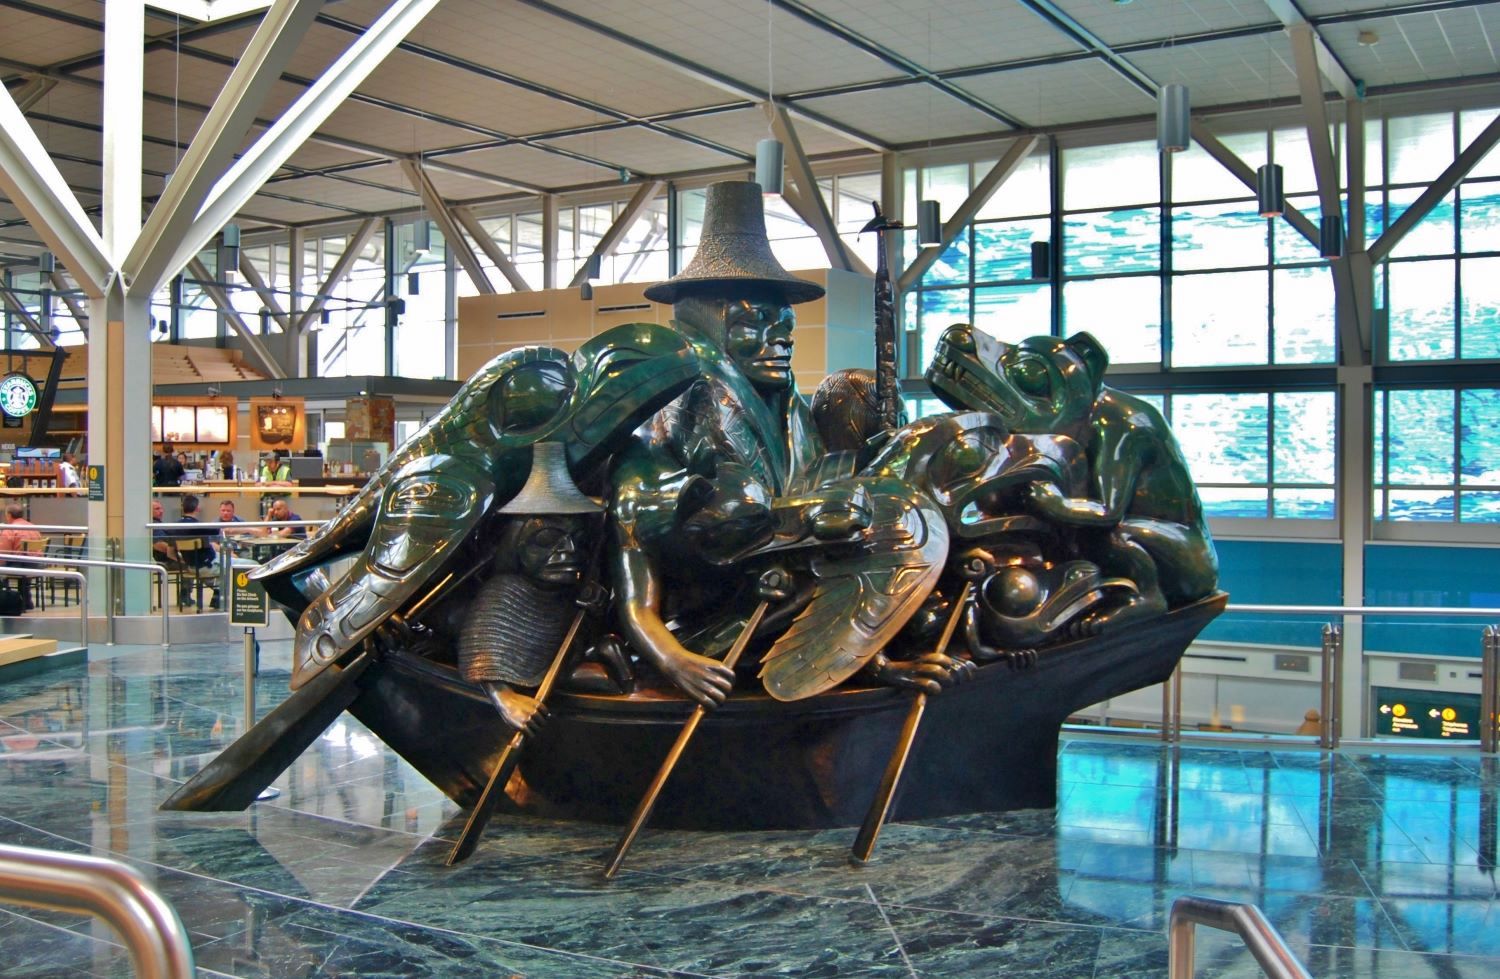 A large bronze sculpture of a Haida person surrounded by animals in a canoe is prominently displayed in an airport.